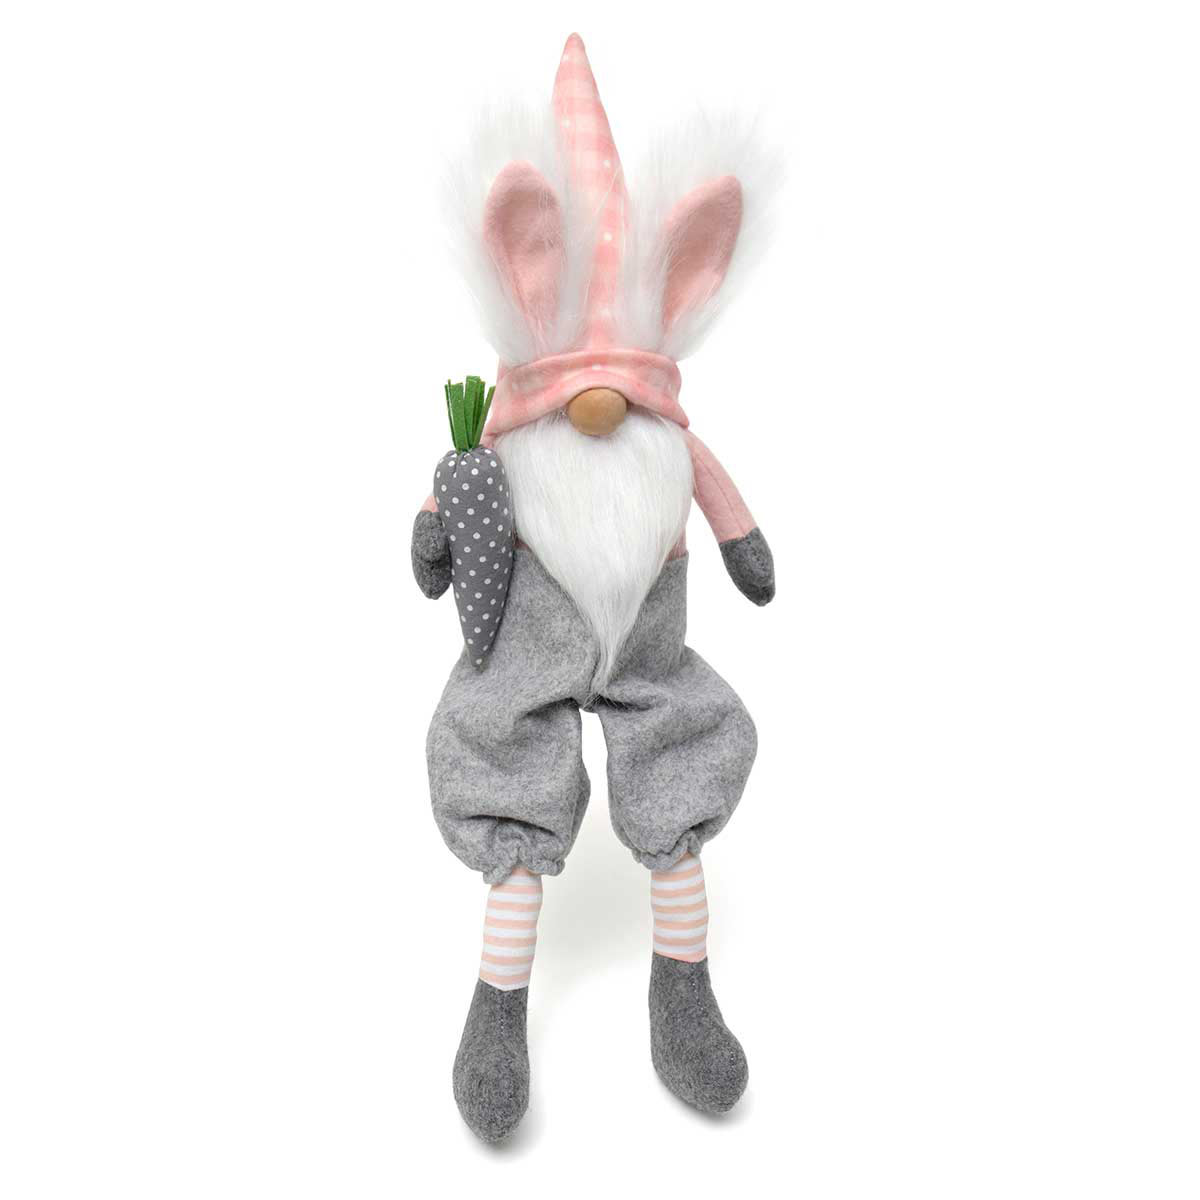 !Wild Hare Gnome with Carrot, Wood Nose 20"